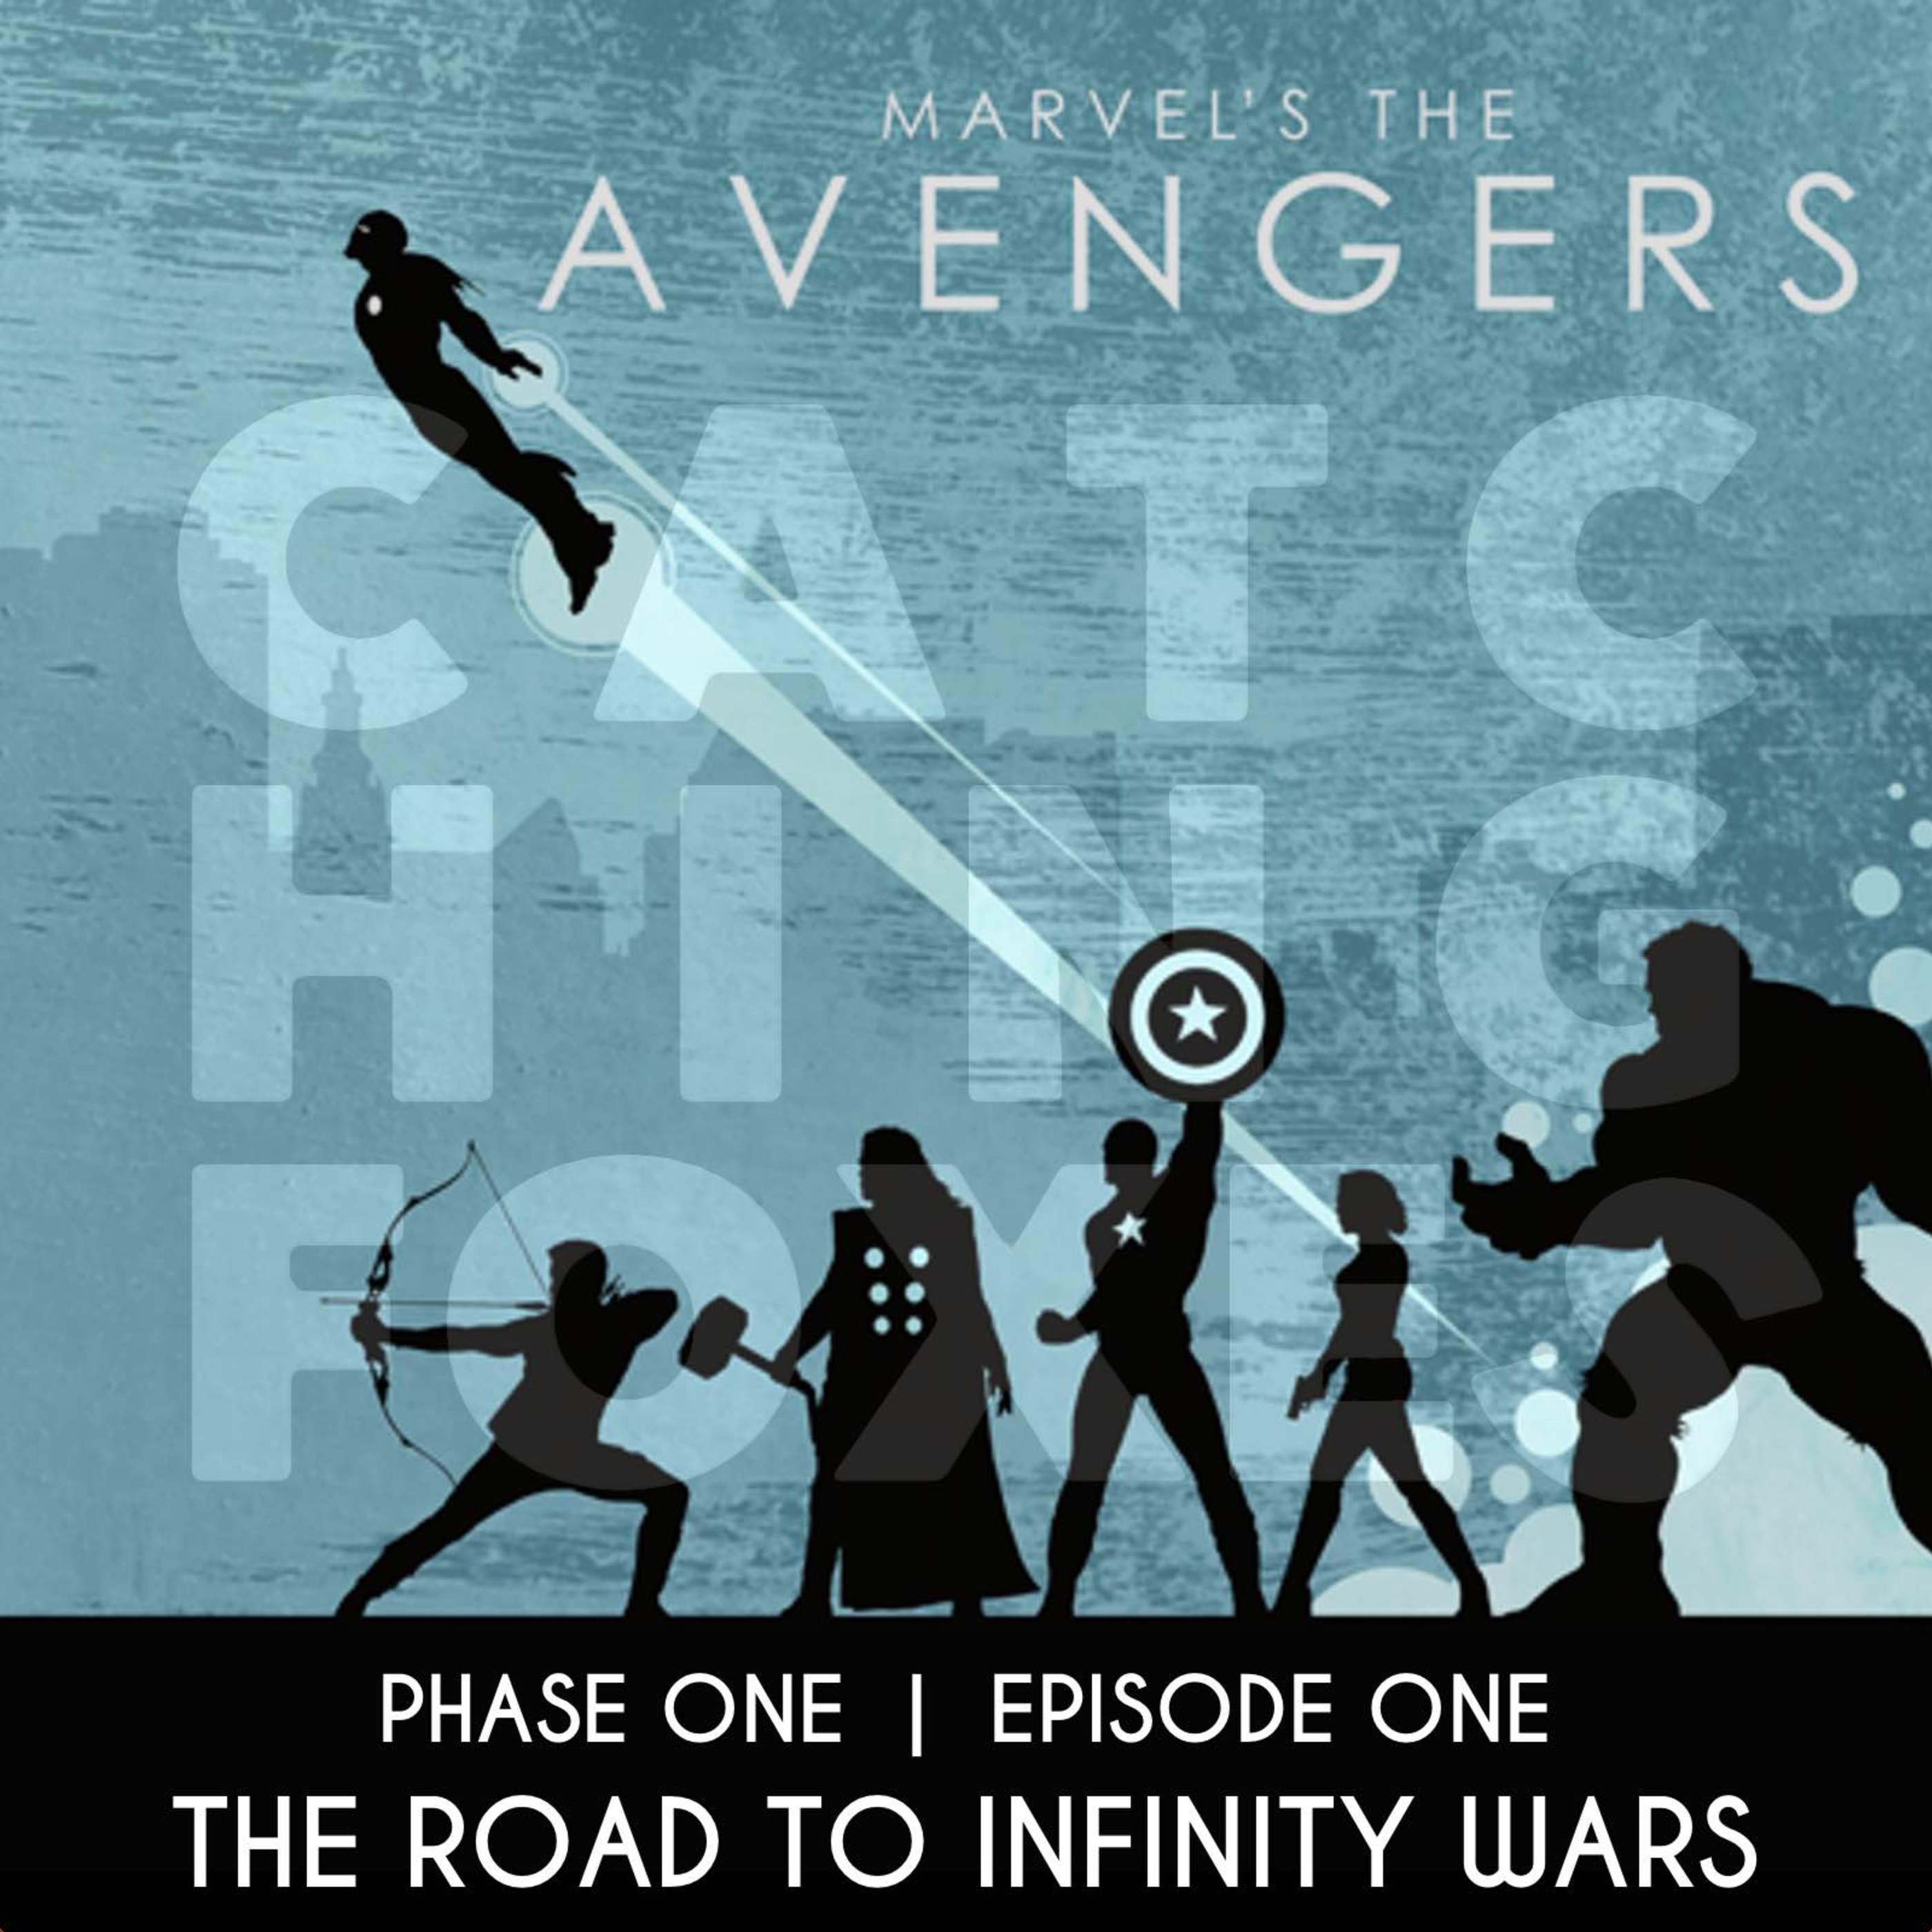 The Road to Infinity Wars! Phase One, Episode One